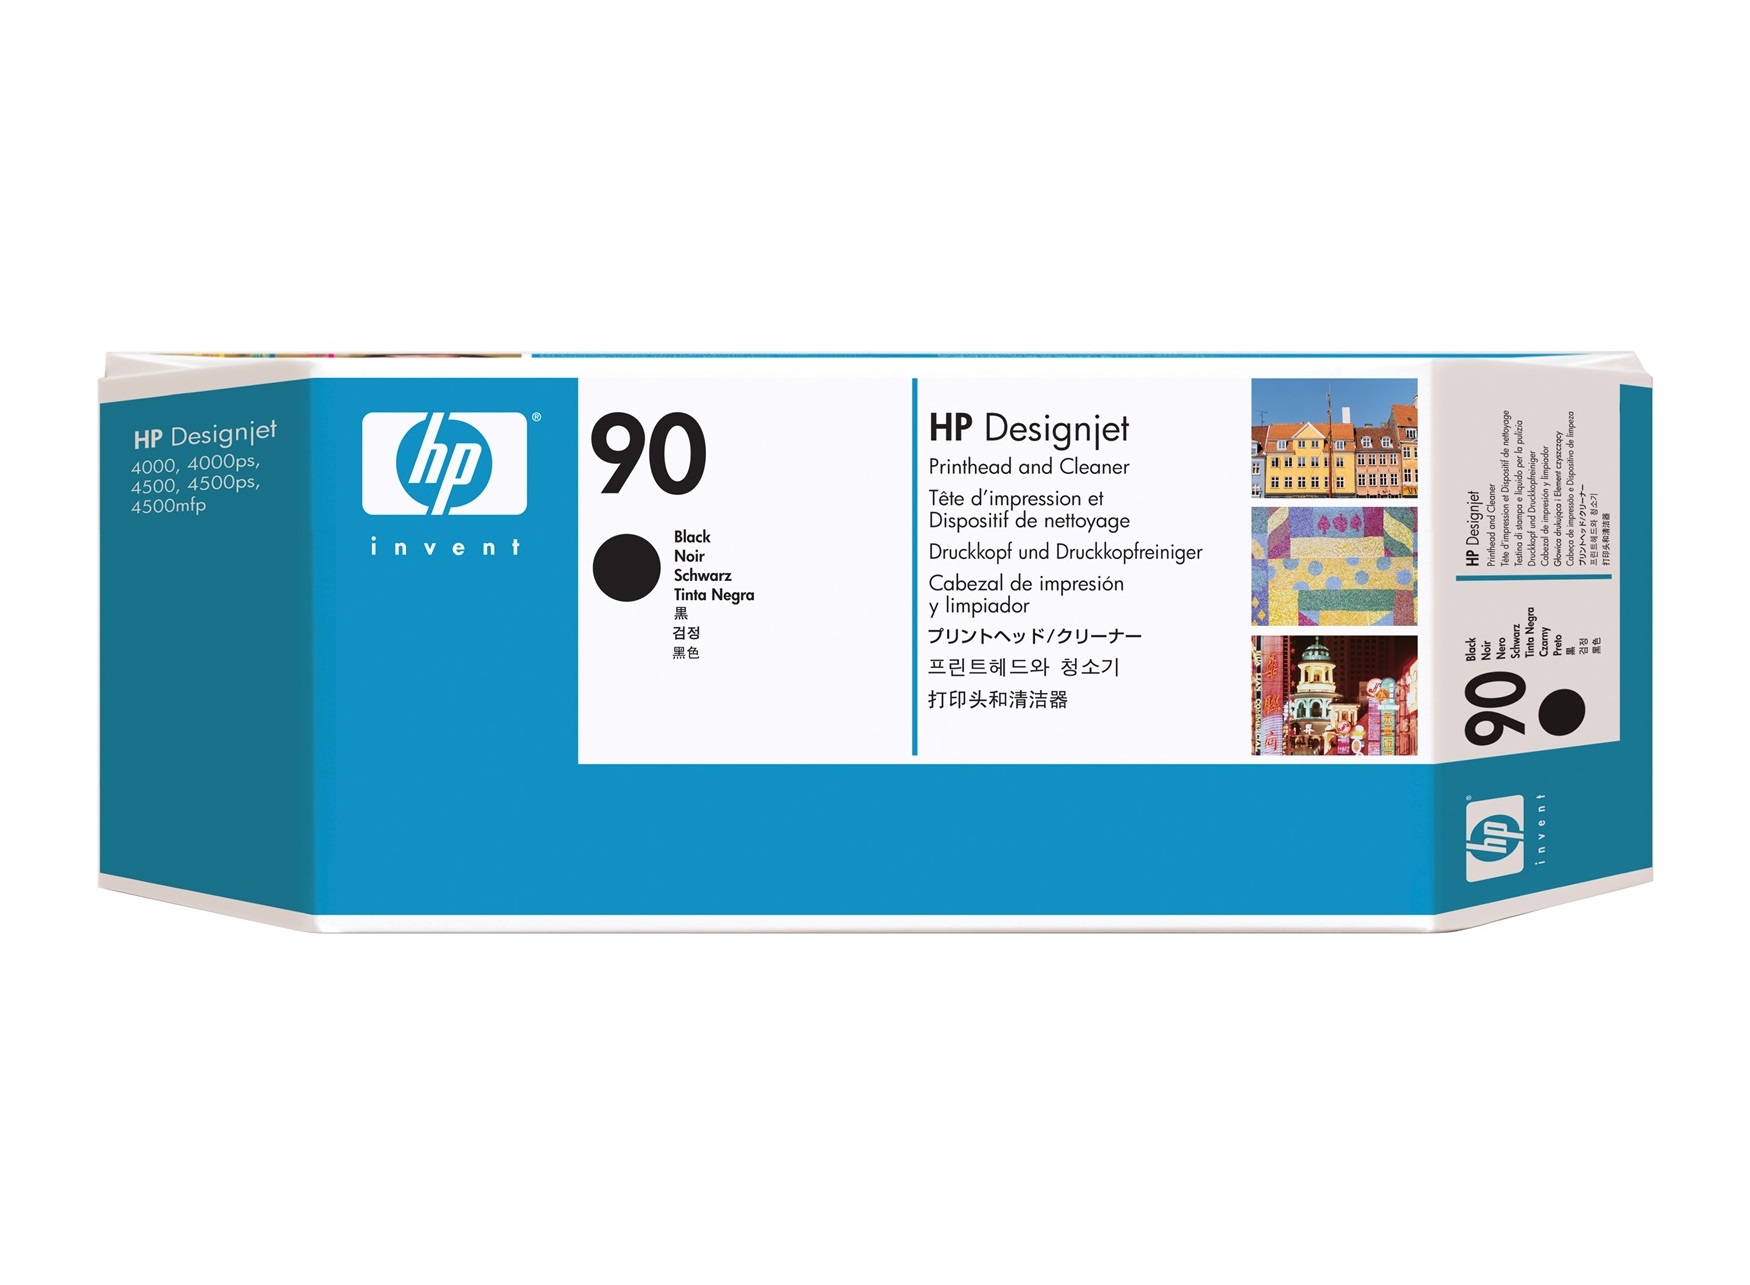 Related to HP 4000PS CARTRIDGES: C5054A